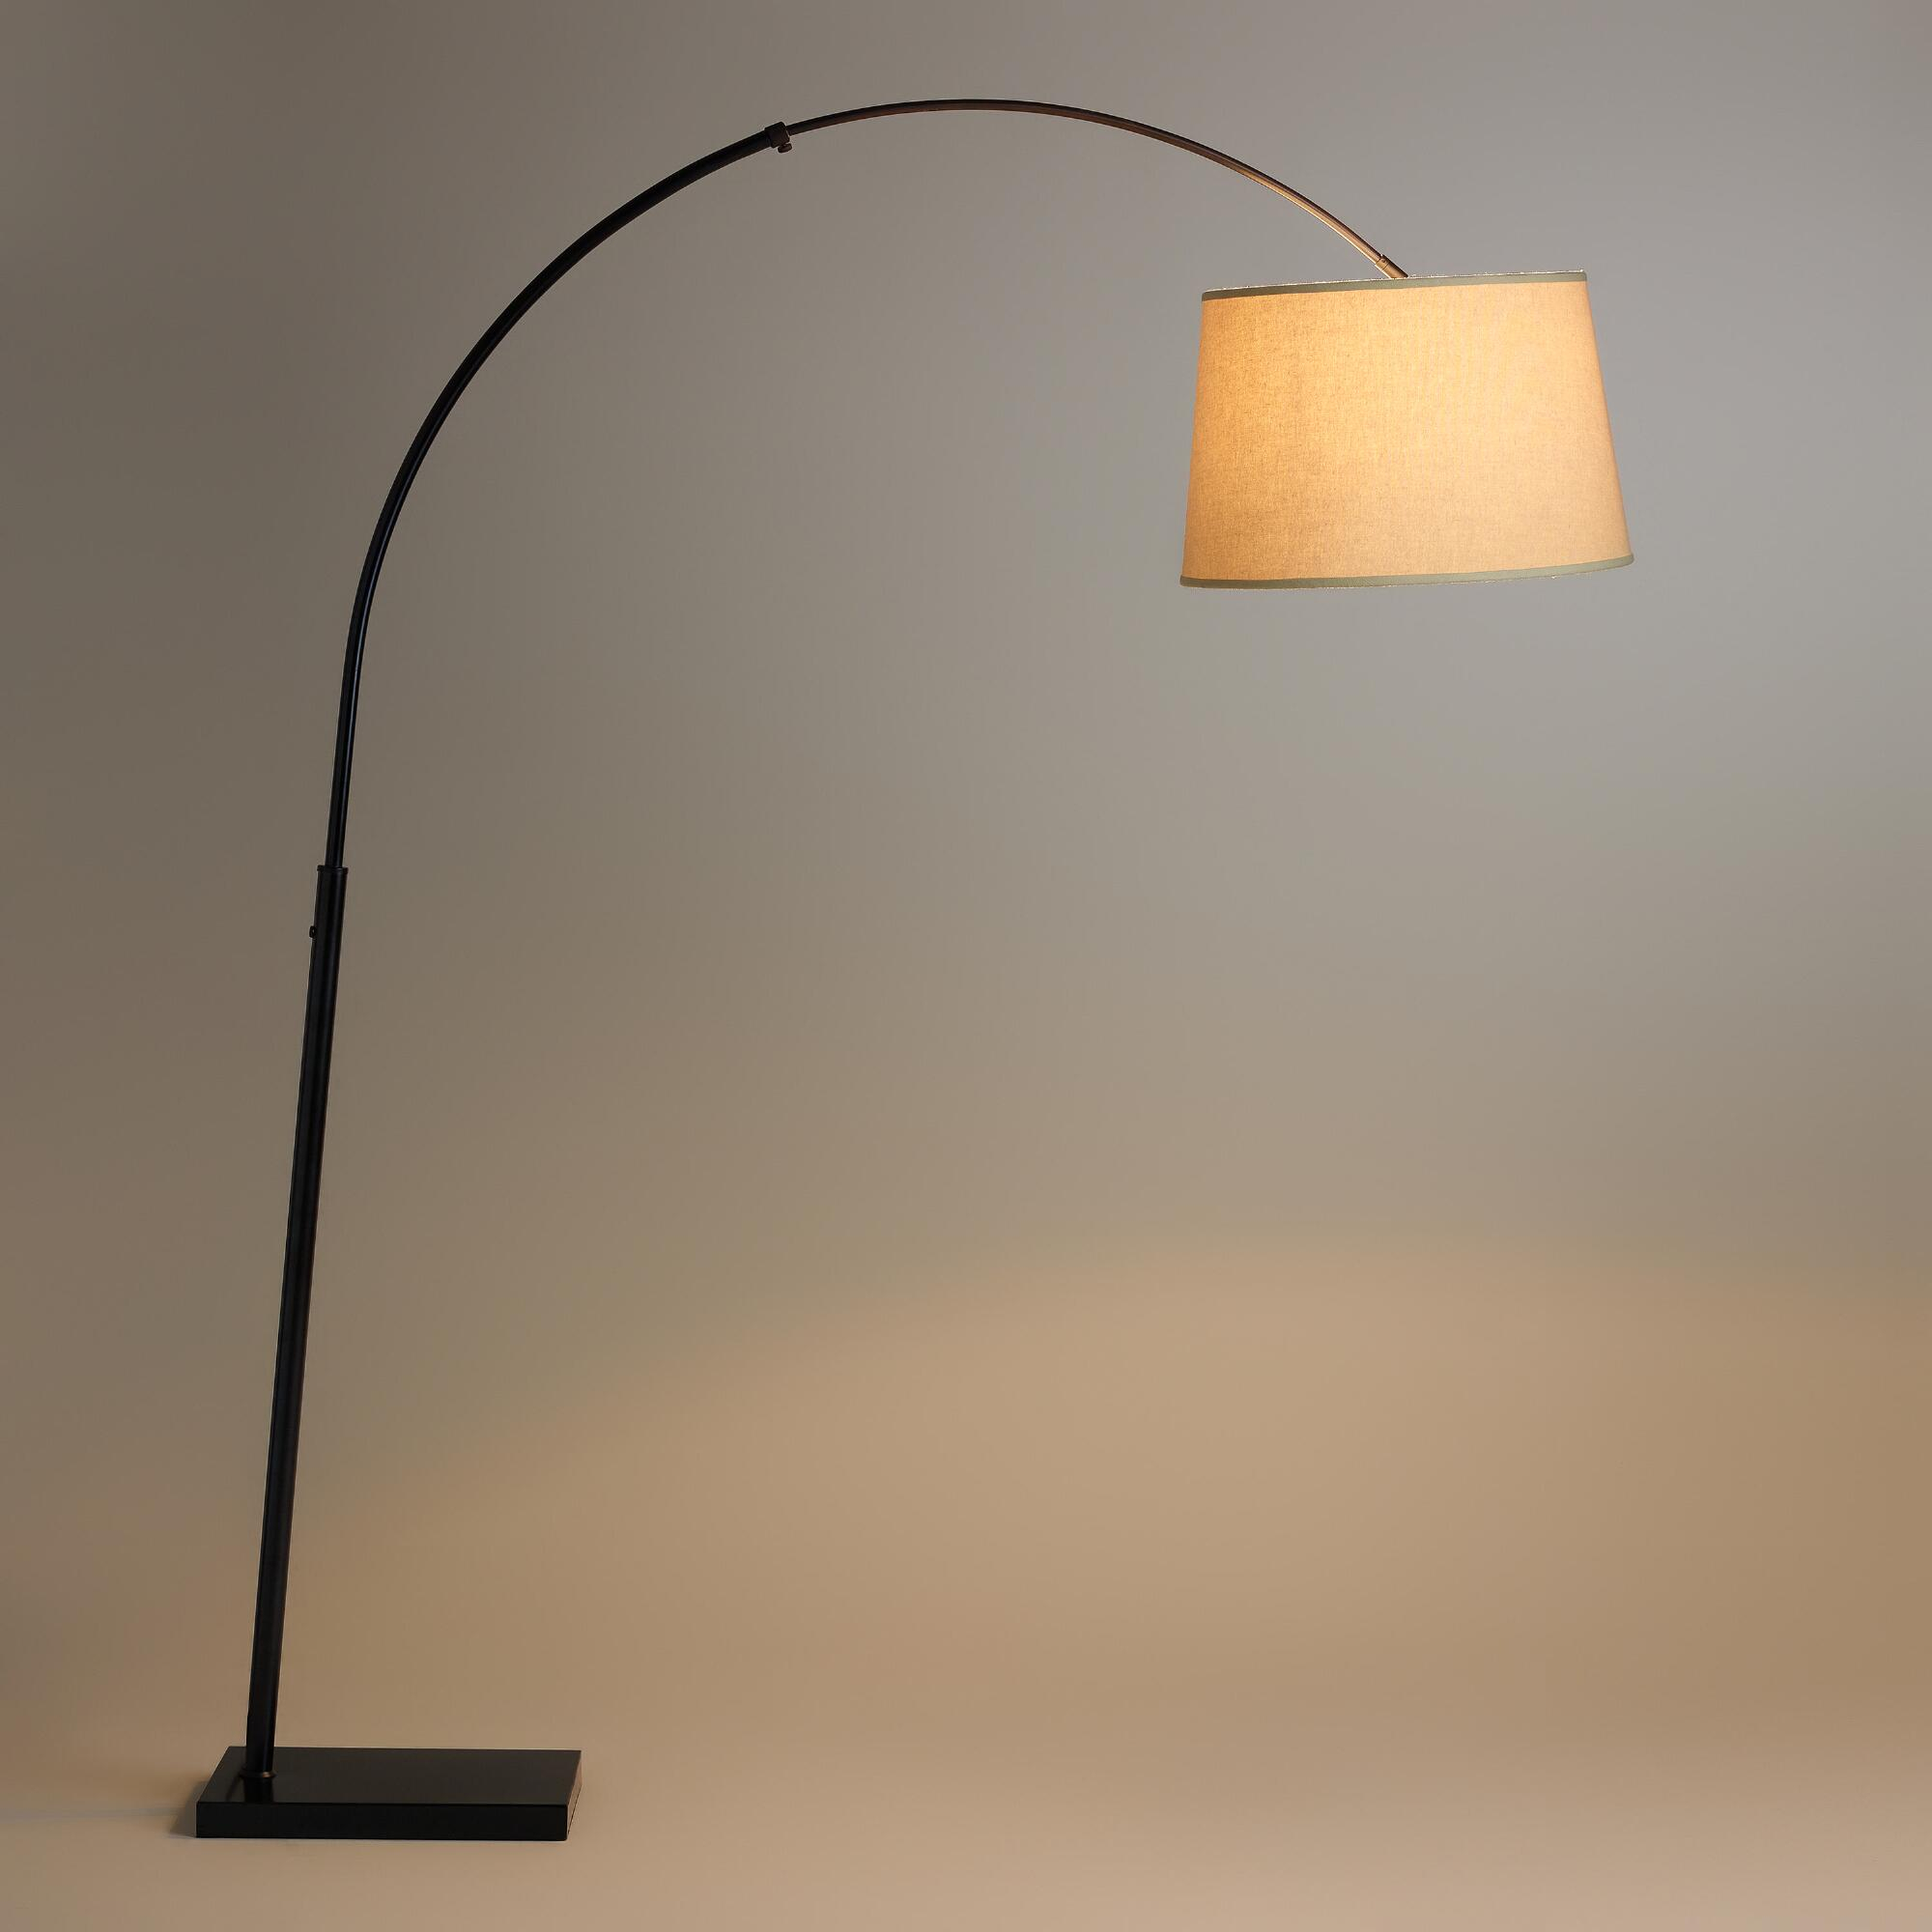 Sleek And Dramatic The Loden Arc Floor Lamp Base Creates throughout proportions 2000 X 2000